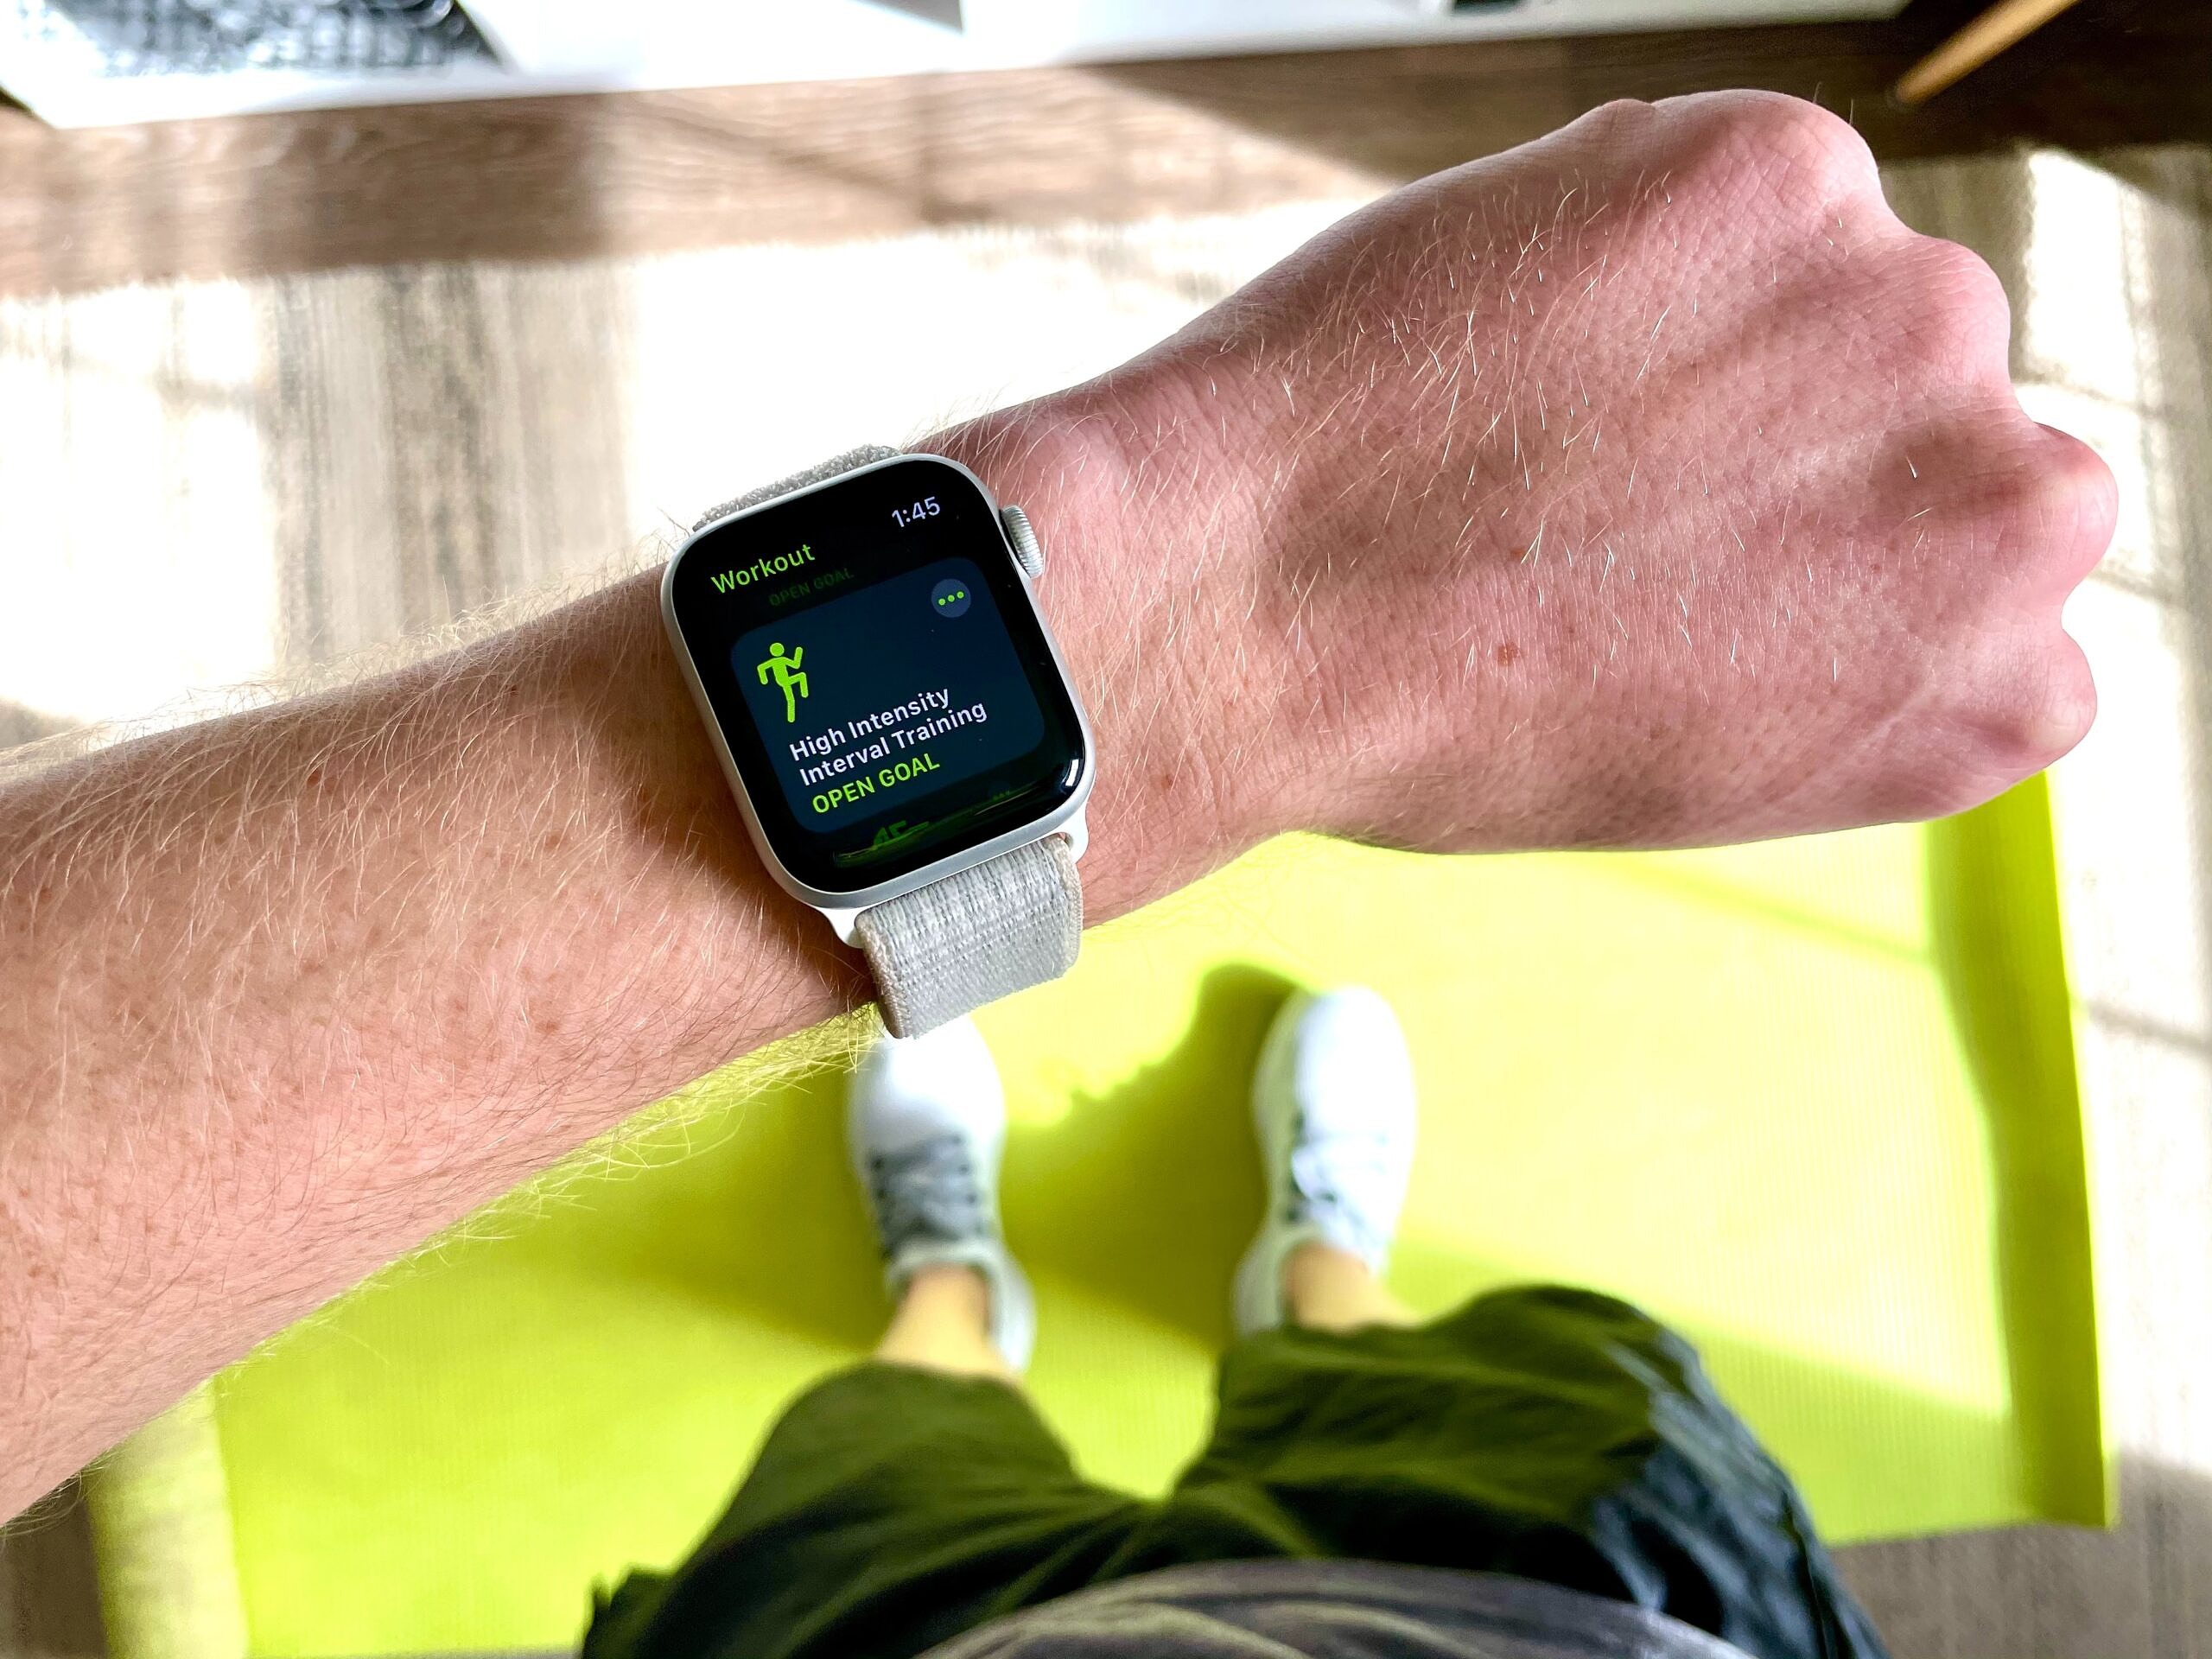 Wrist with apple watch during exercise.